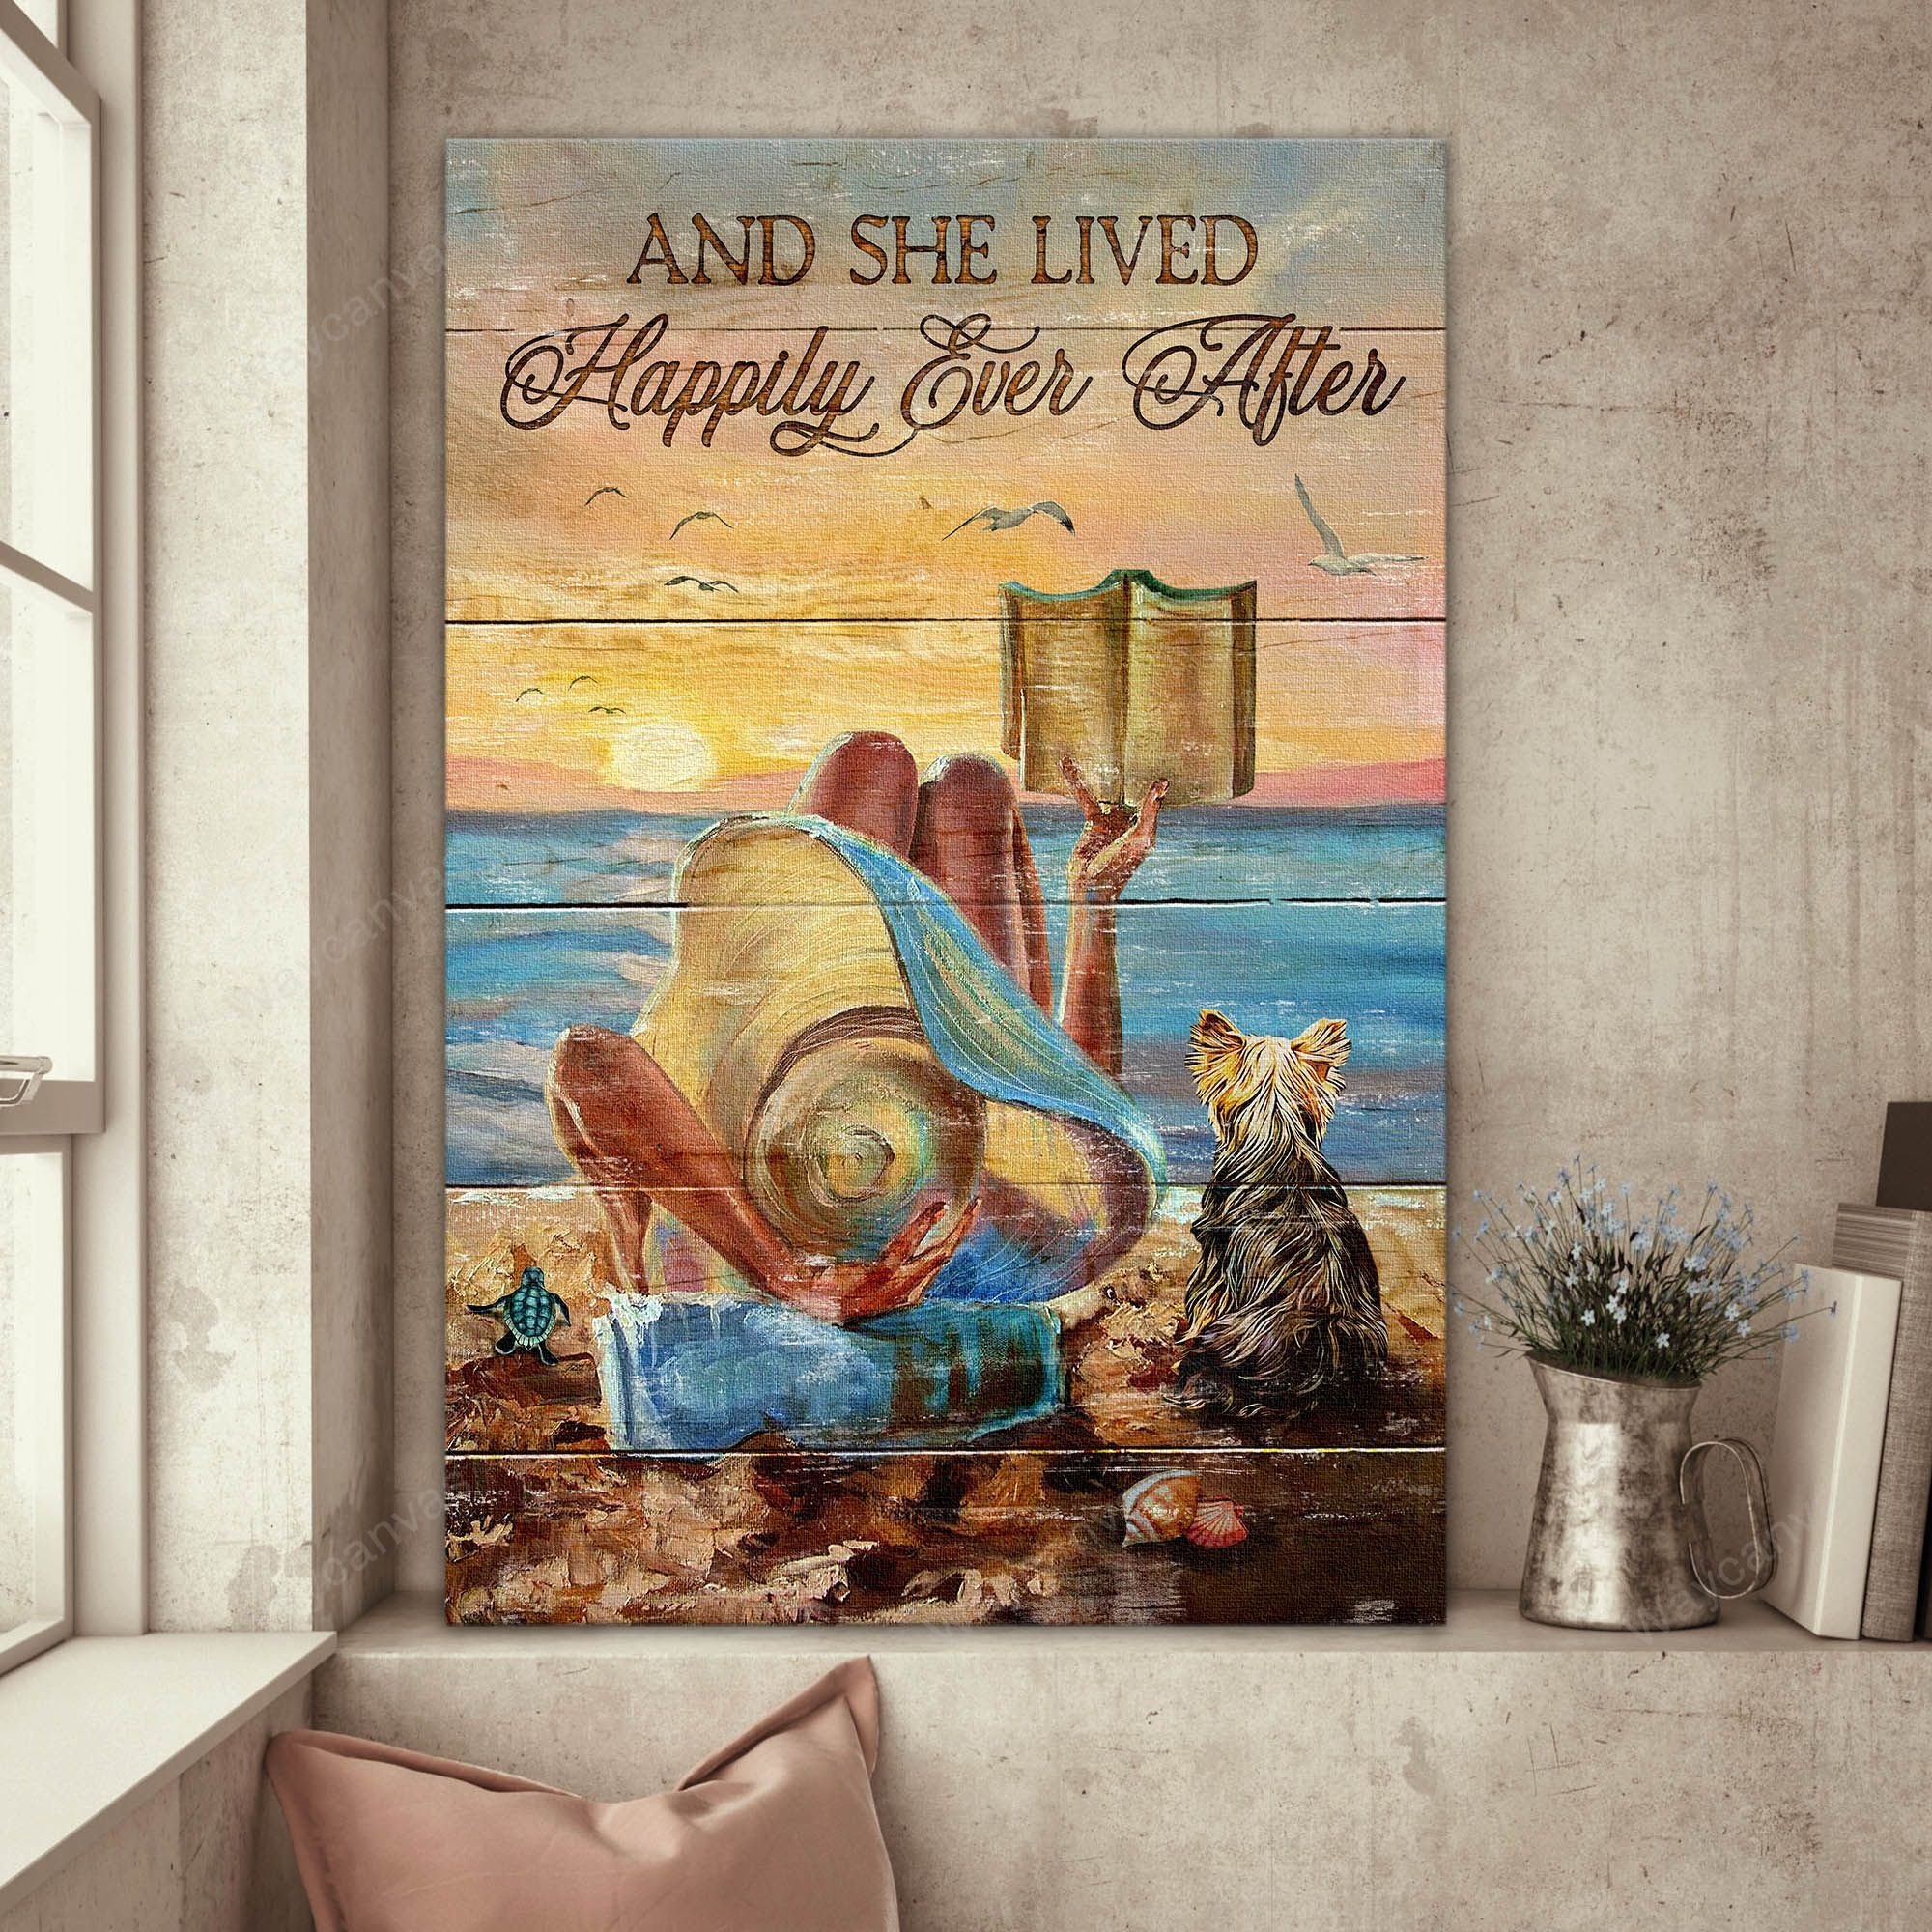 Yorkshire Terrier Portrait Canvas- Beach Landscape, Horizon, Yorkshire, Beautiful Girl Yorkshire Canvas- Gift For Yorkshire Terrier Lover- And She Lived Happily With Her